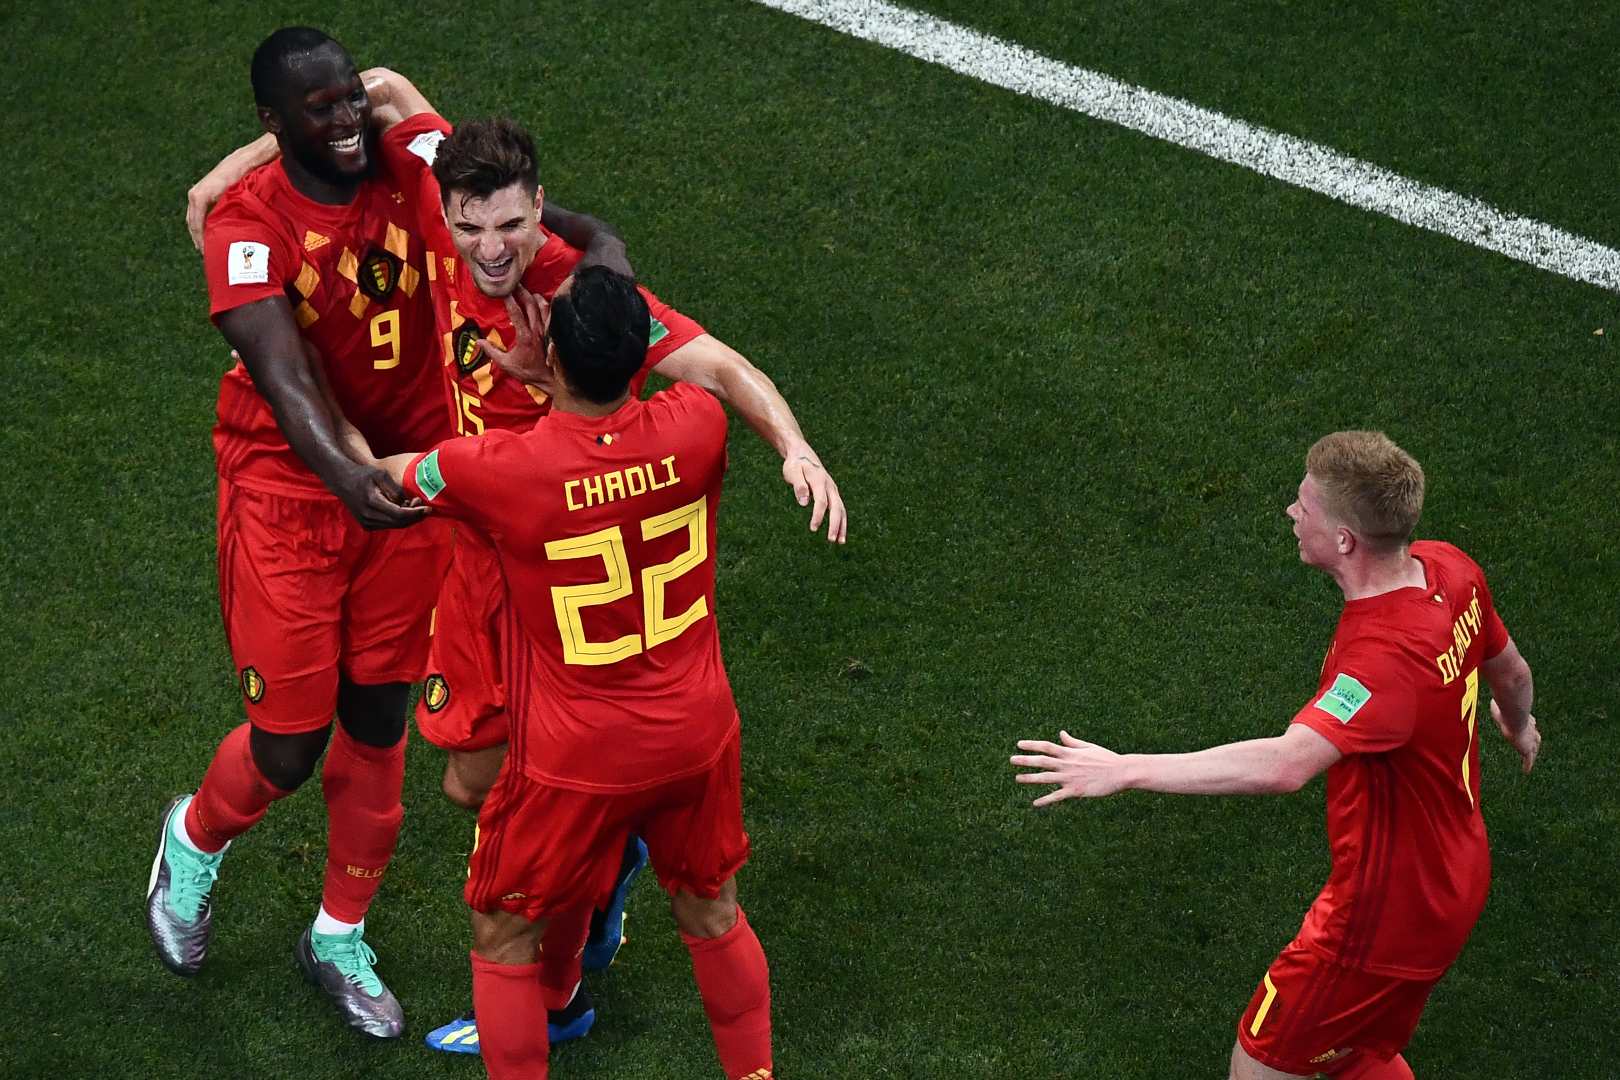 Belgium's midfielder Nacer Chadli (C) celebrates with Belgium's forward Romelu Lukaku (L), Belgium's defender Thomas Meunier (2ndL) and Belgium's midfielder Kevin De Bruyne (R) after scoring his team's winning goal during the Russia 2018 World Cup round of 16 football match between Belgium and Japan at the Rostov Arena in Rostov-On-Don on July 2, 2018. (Photo by Jewel SAMAD / AFP) / RESTRICTED TO EDITORIAL USE - NO MOBILE PUSH ALERTS/DOWNLOADS (Photo credit should read JEWEL SAMAD/AFP via Getty Images)